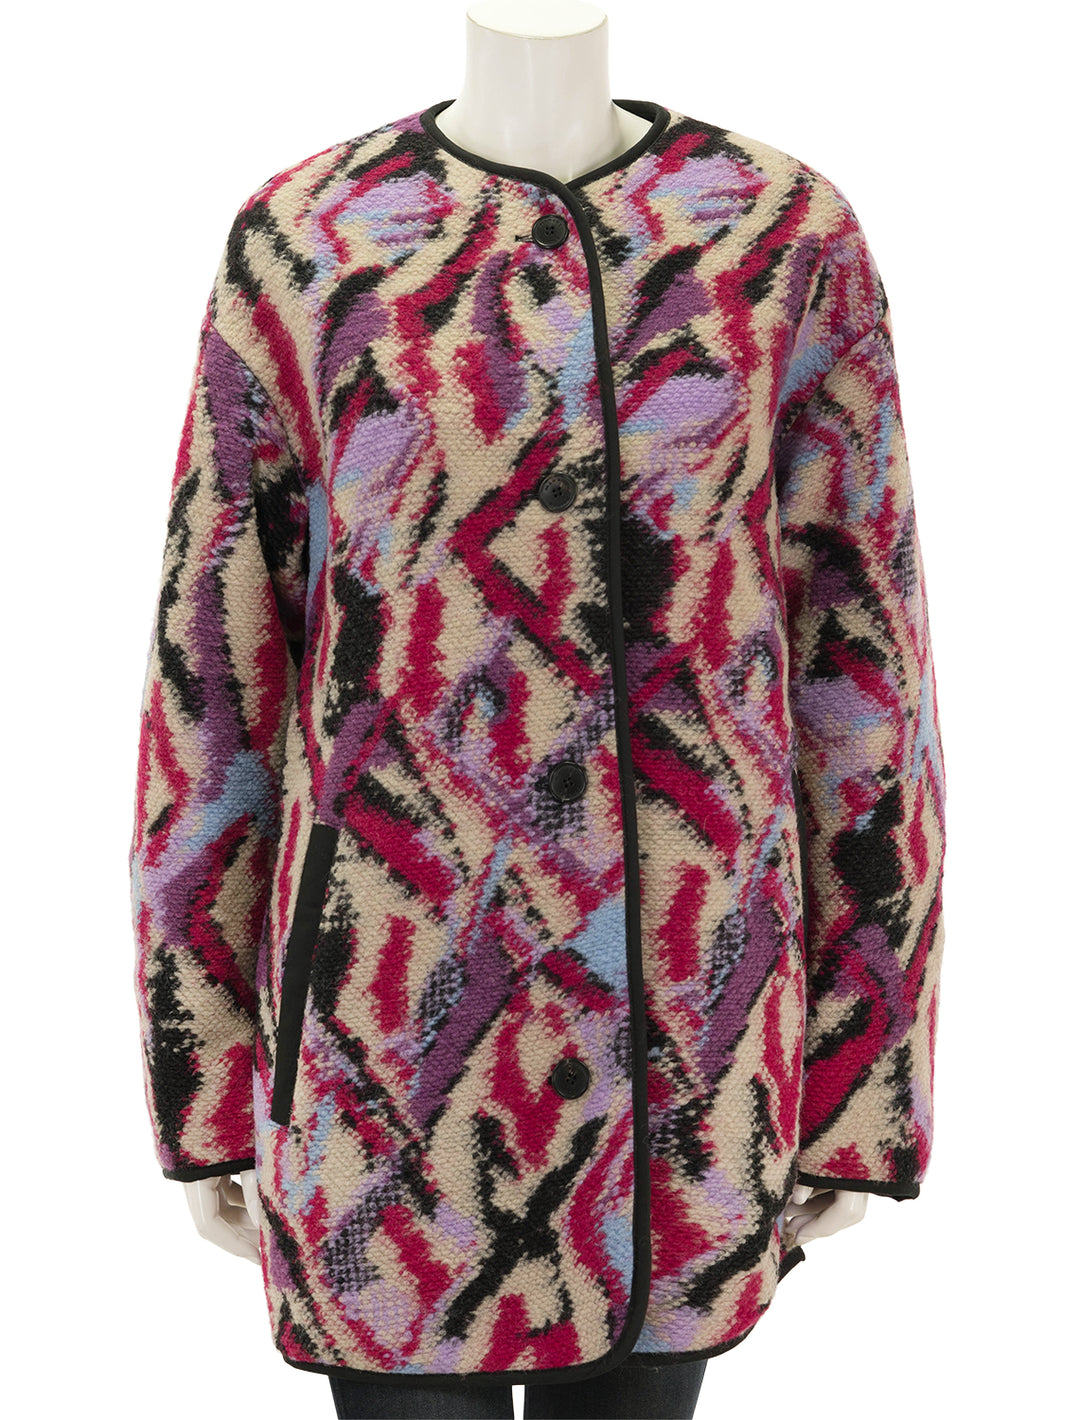 Front view of Isabel Marant Étoile's Himemma Jacket in Fuchsia, buttoned.